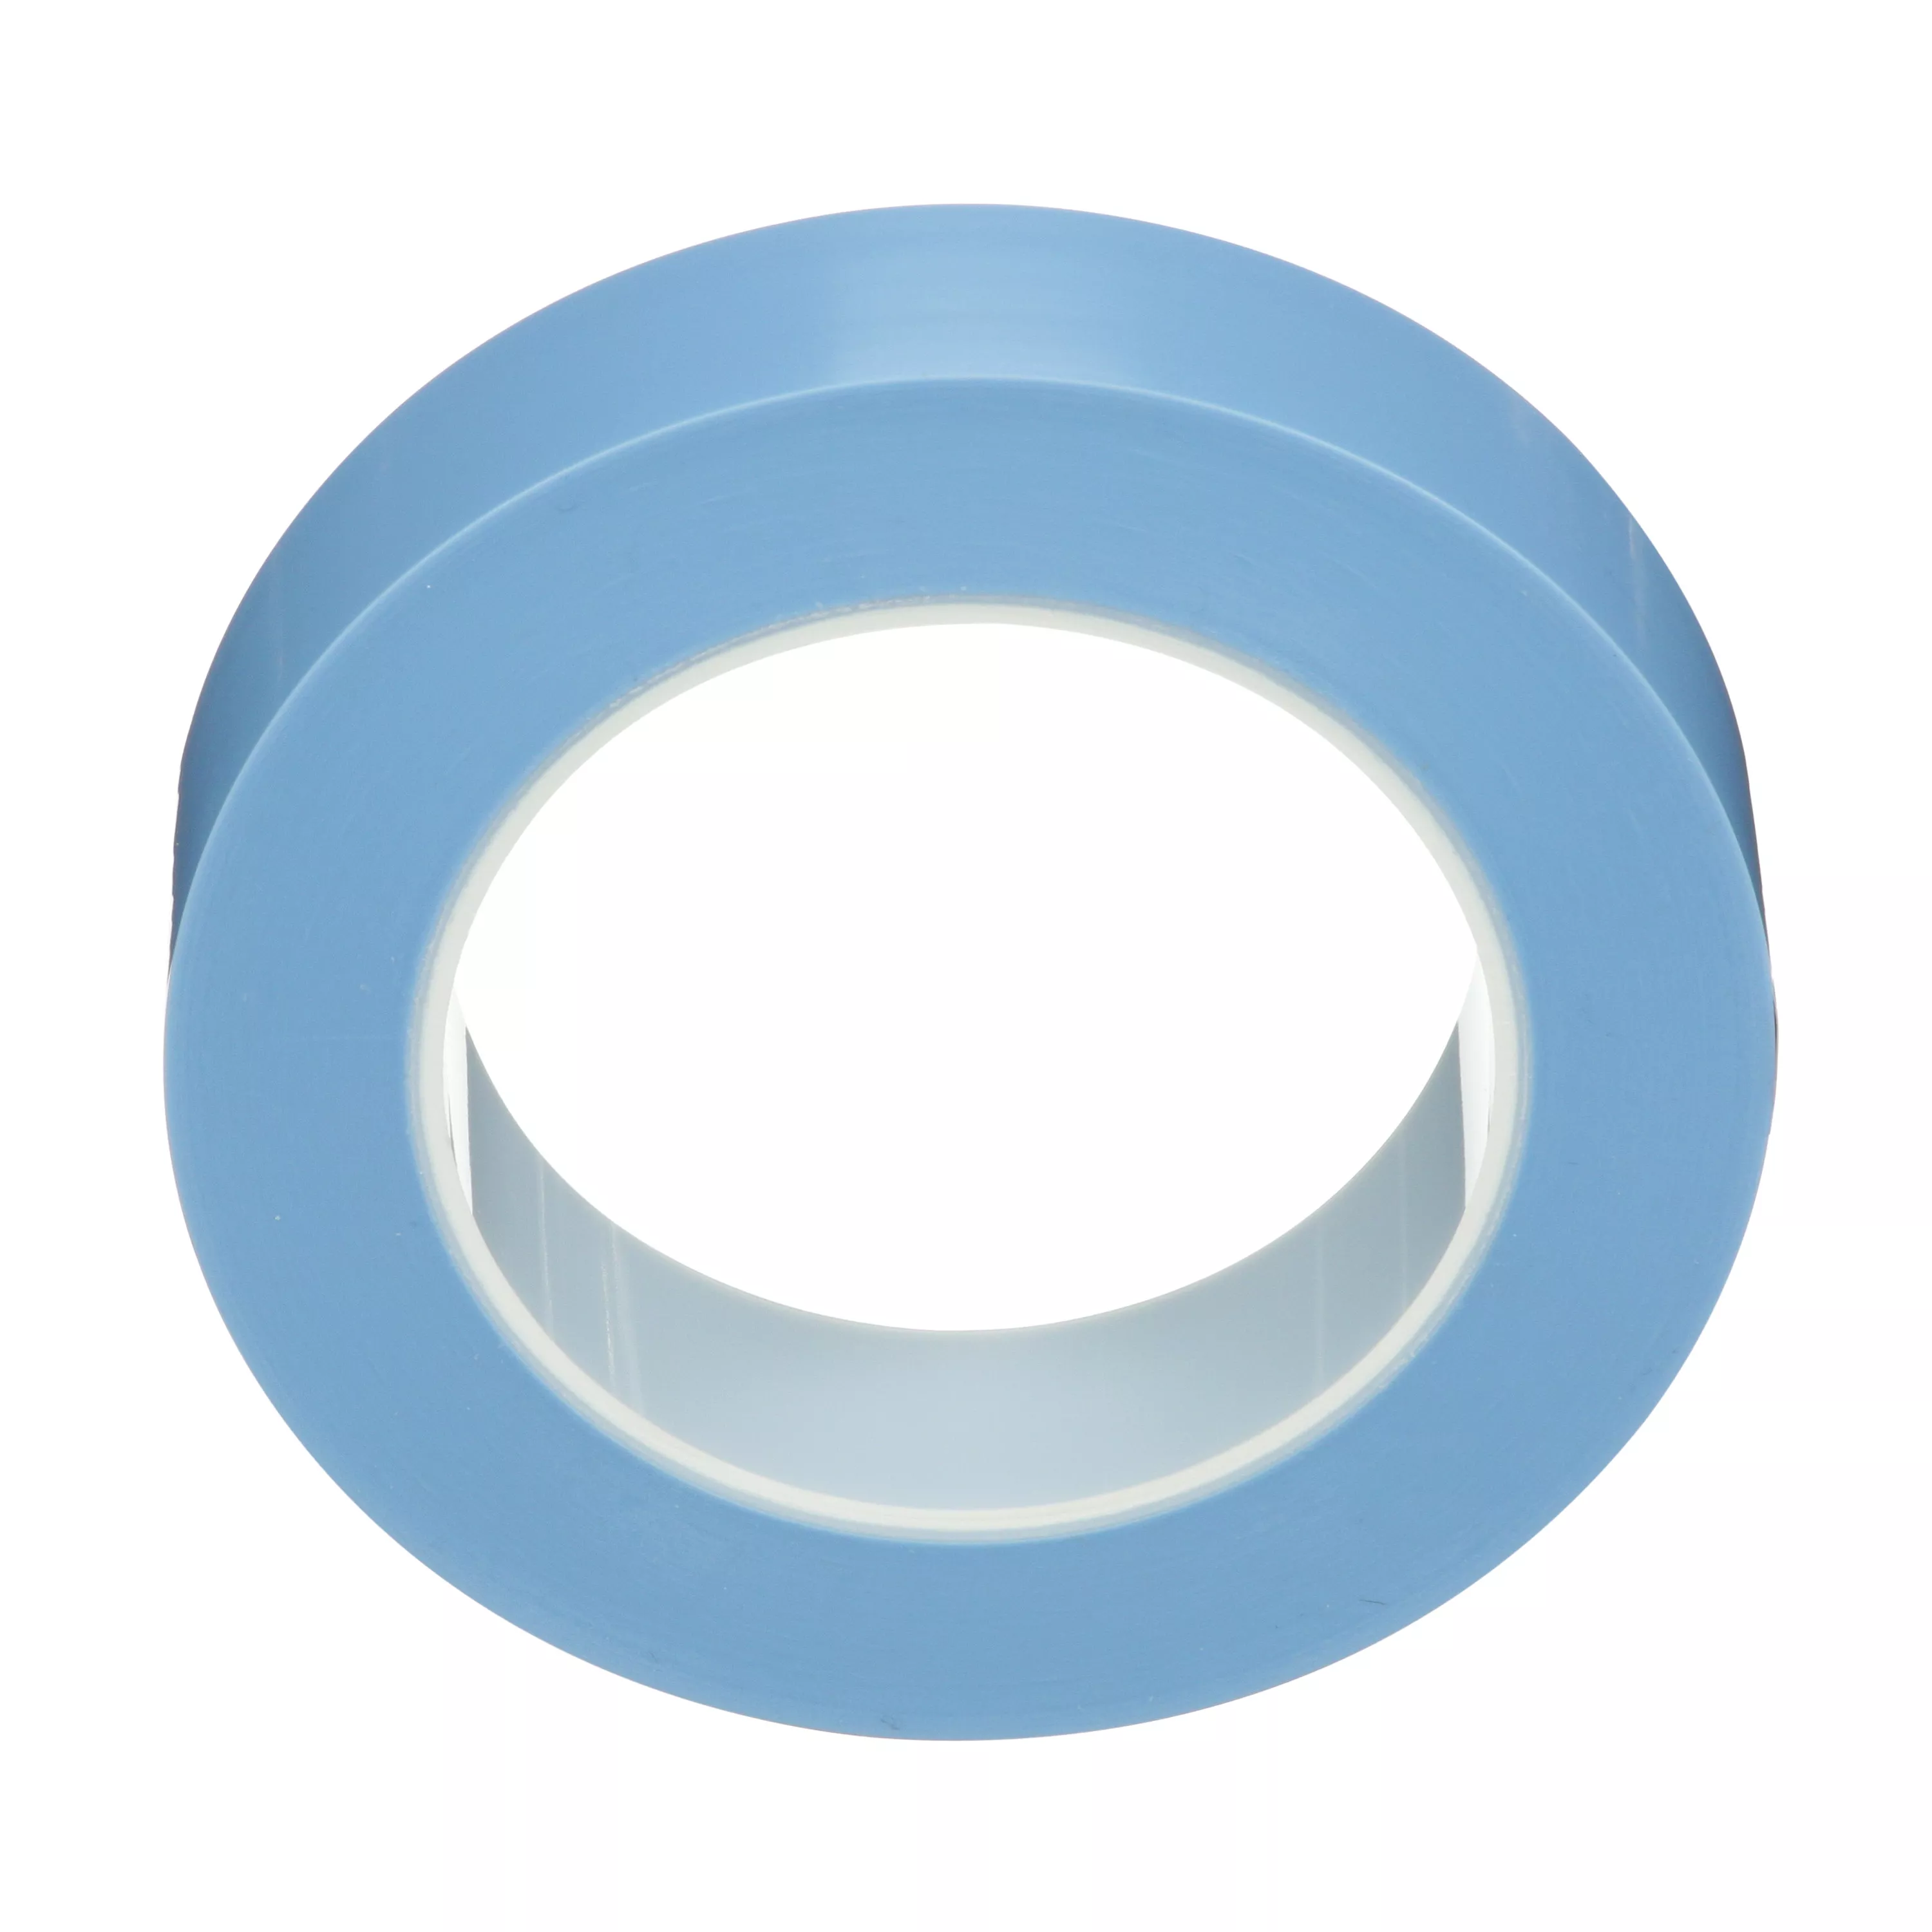 Product Number 2800 | Scotch® Masking Tape 2800